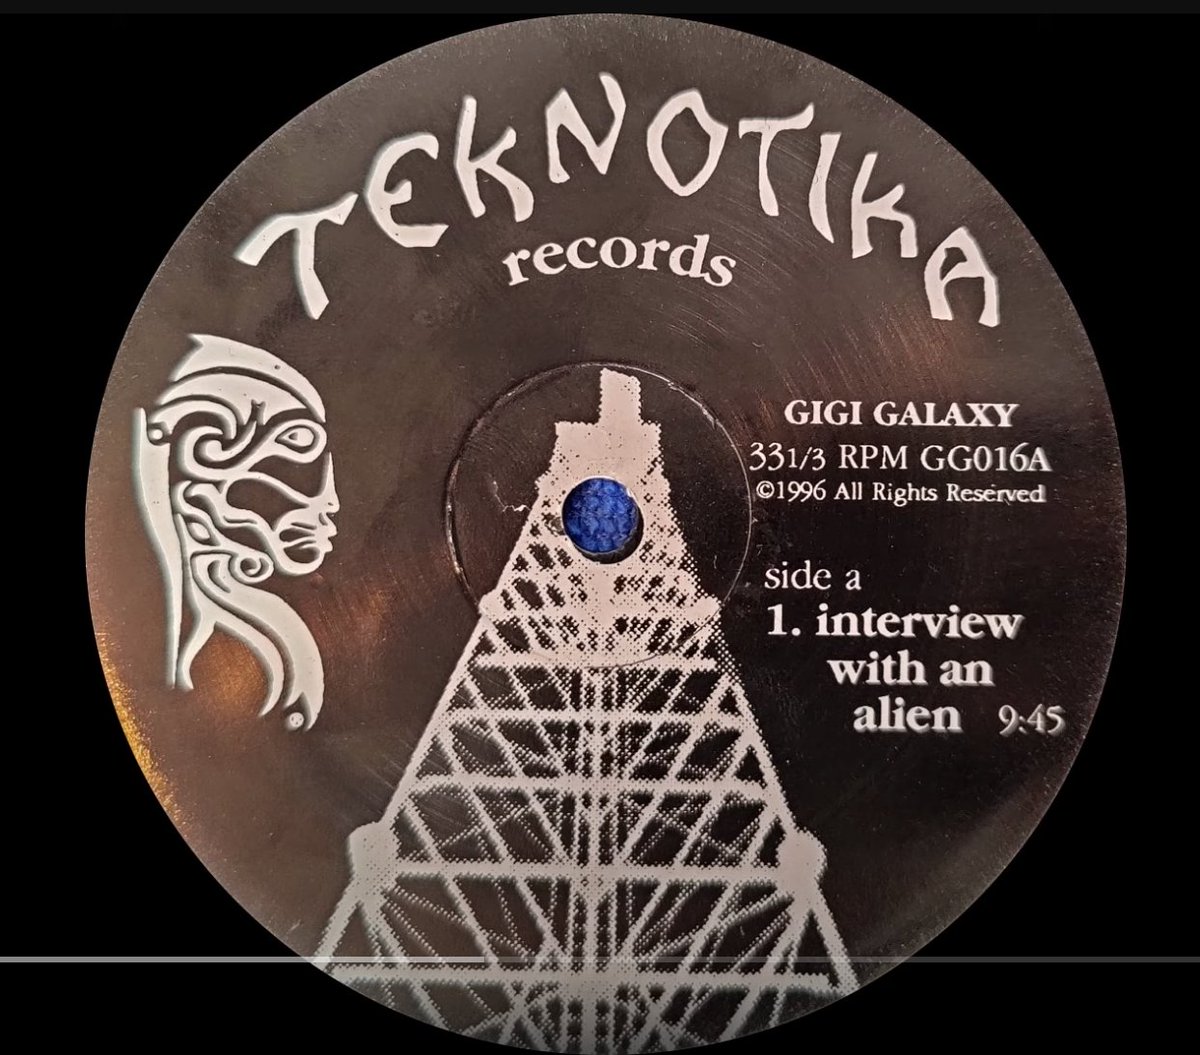 Banger of the day! Gigi Galaxy - Interview with an alien Label: Teknotika Records (GG016) Year: 1996
youtu.be/zflq9RlZPGk
 #deephousemusiclovers #classichouse #realhousemusic